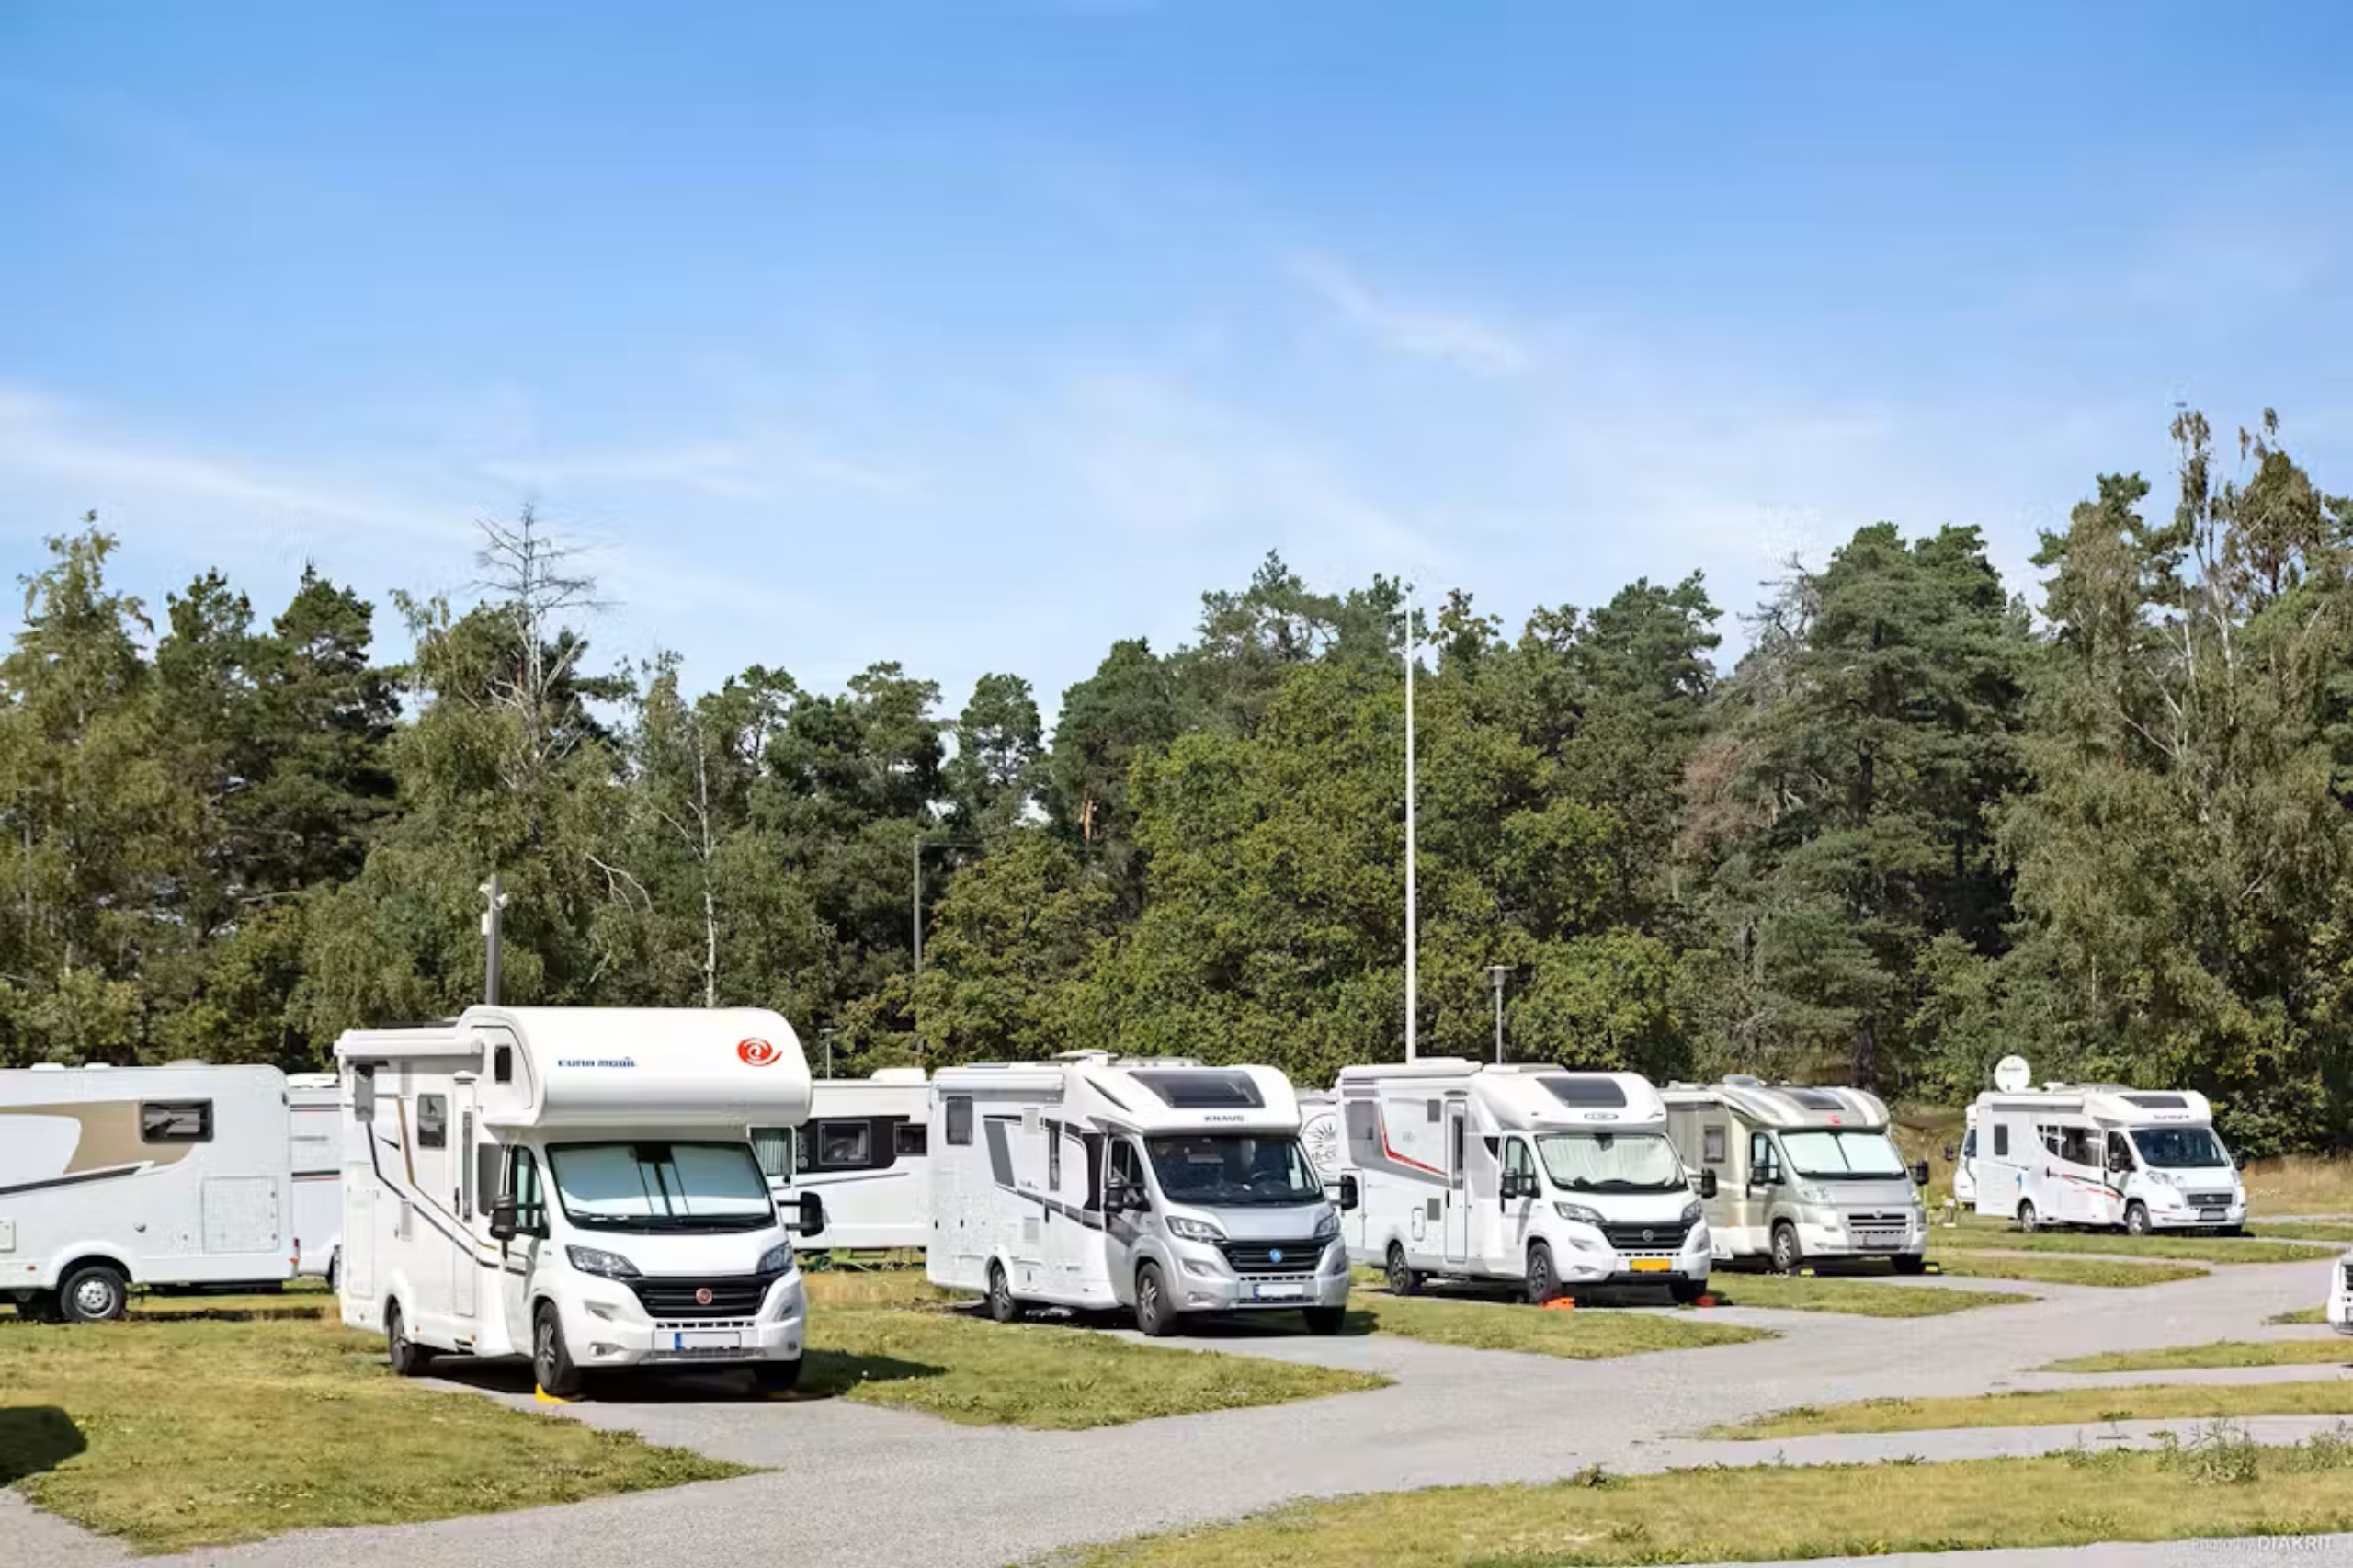 At Ställplats Stockholm, there are nice places for motorhomes. 